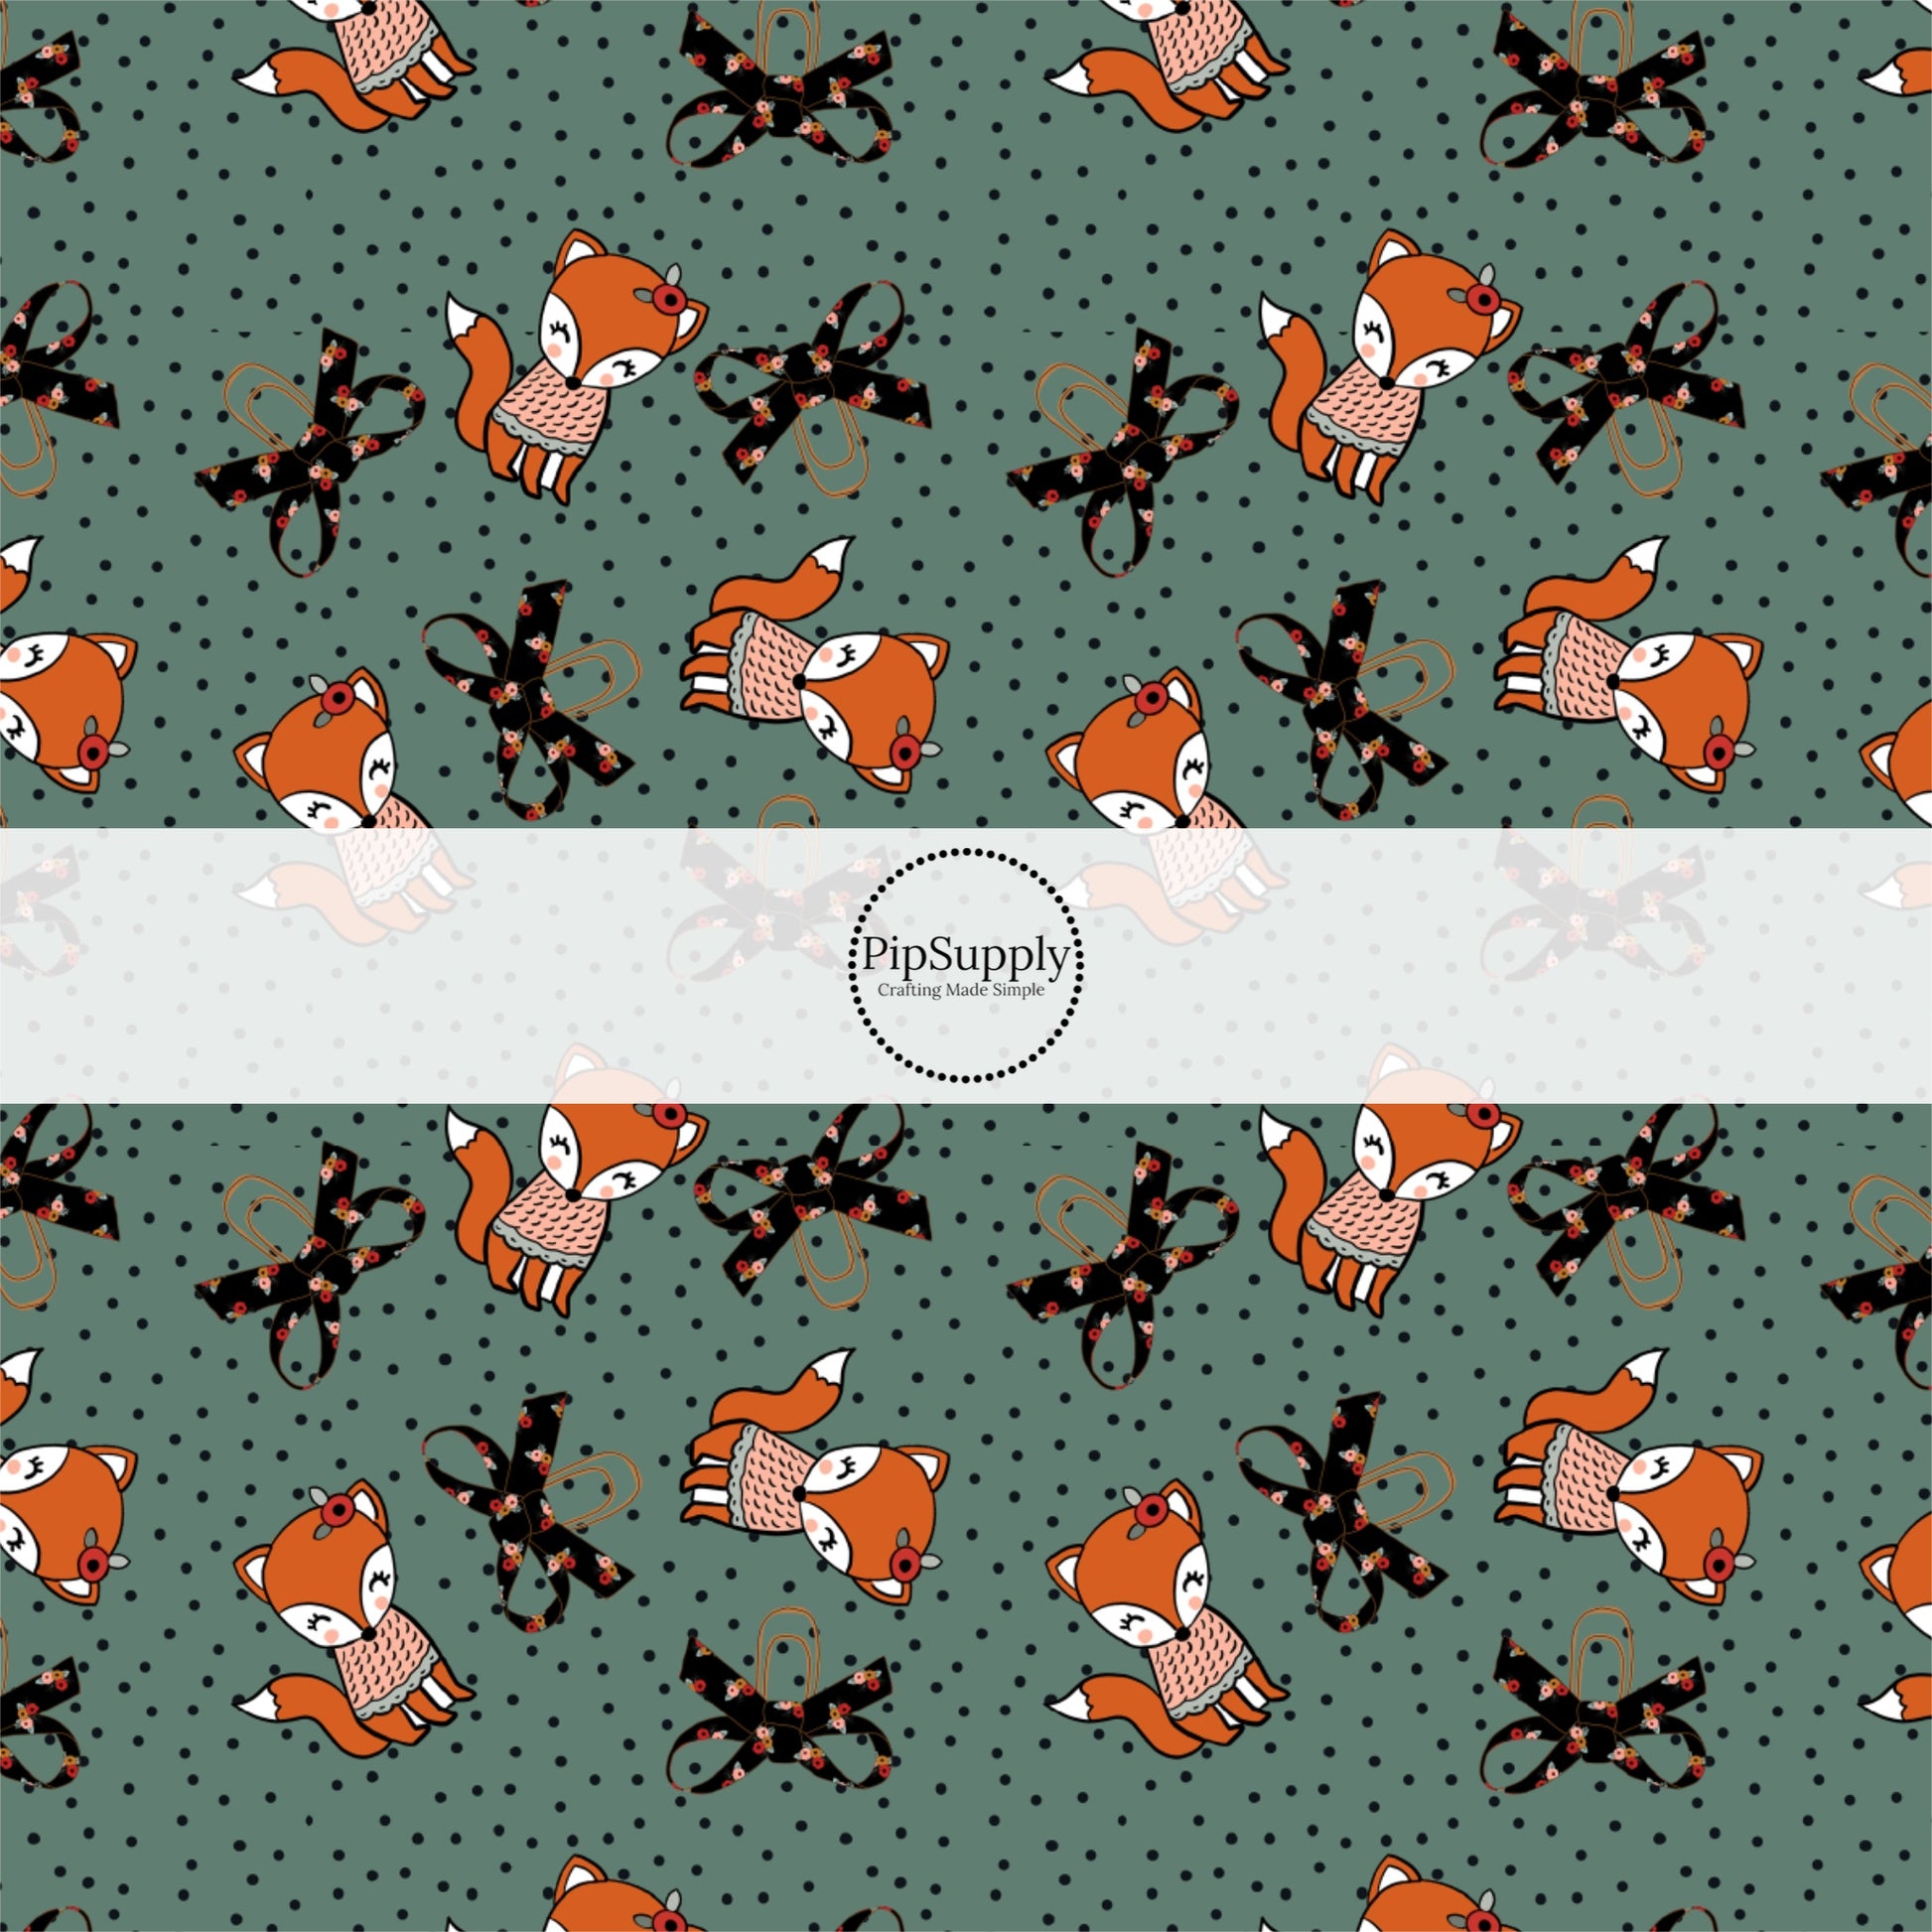 These fall dot themed teal fabric by the yard features orange foxes with black bows on blue with small black dots. This fun fall themed fabric can be used for all your sewing and crafting needs! 